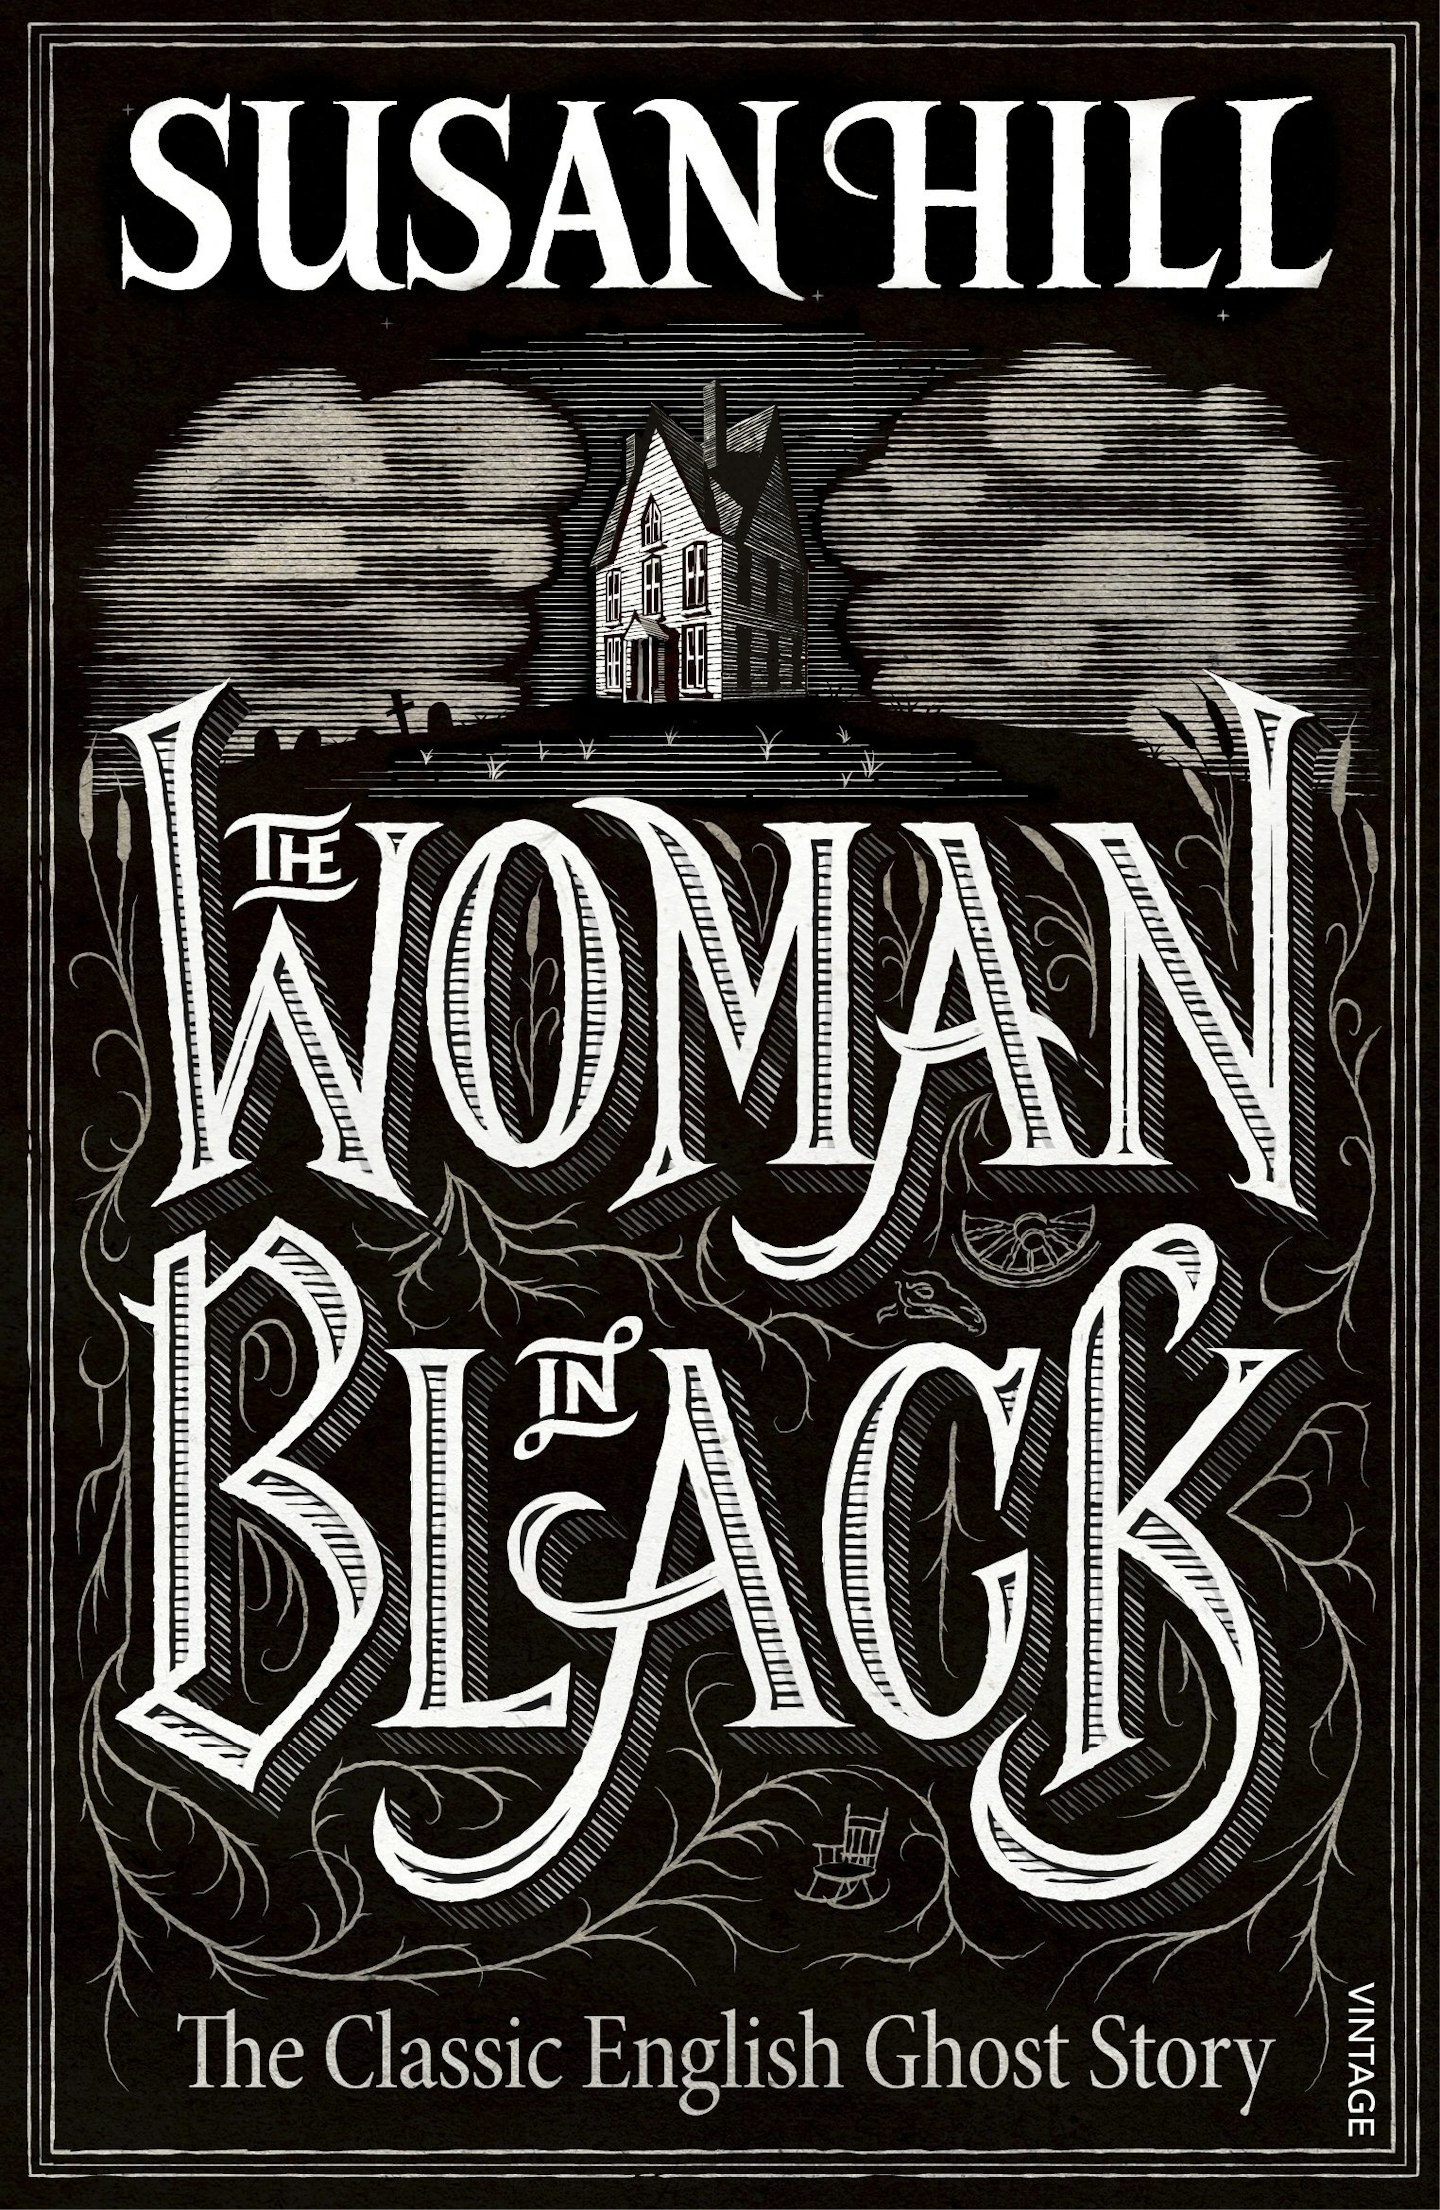 The Woman in Black - Susan Hill (Vintage)